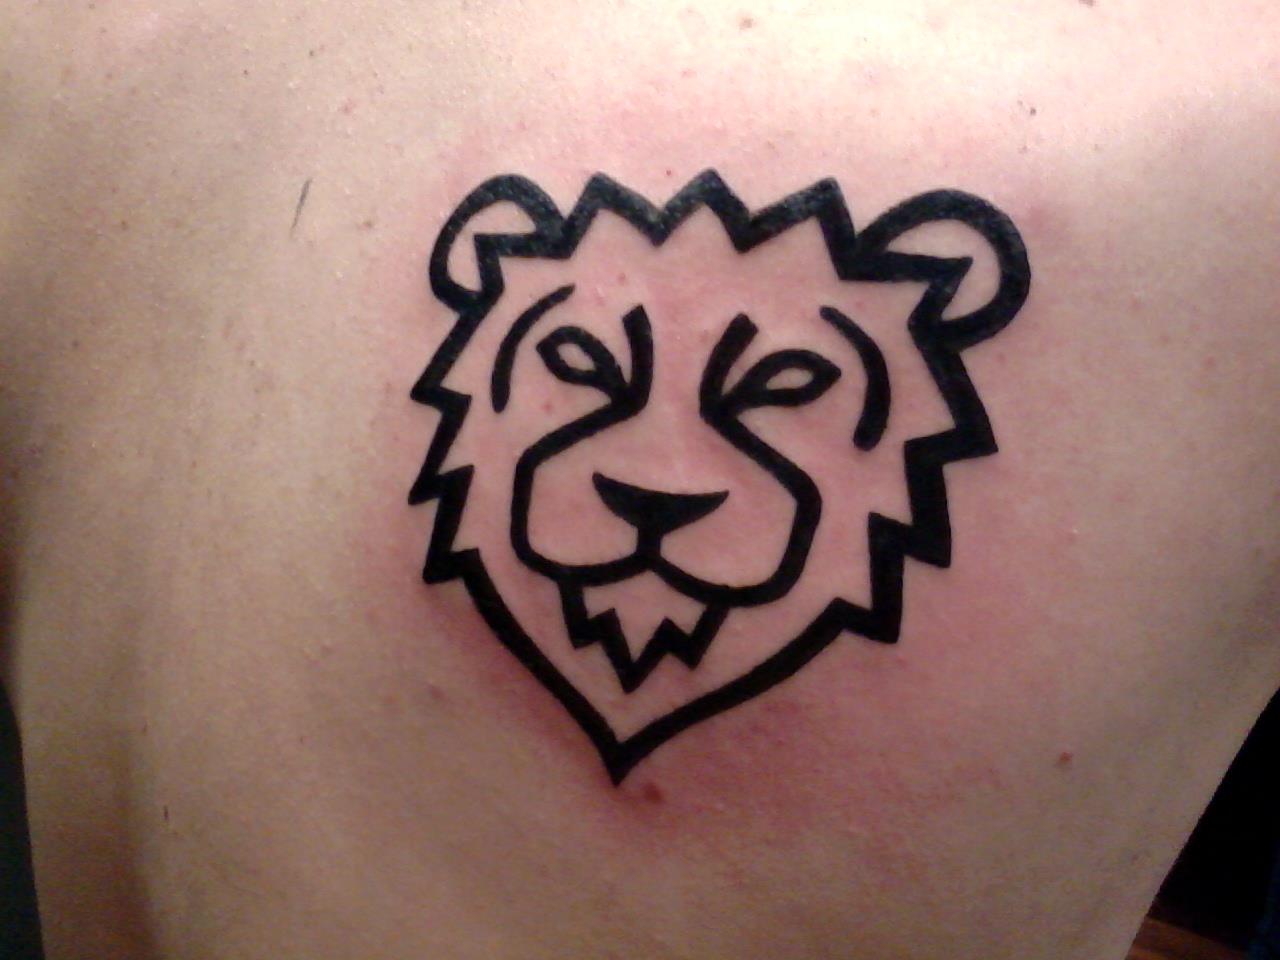 How to make temporary lion face tattoo step by step on skin pad - YouTube